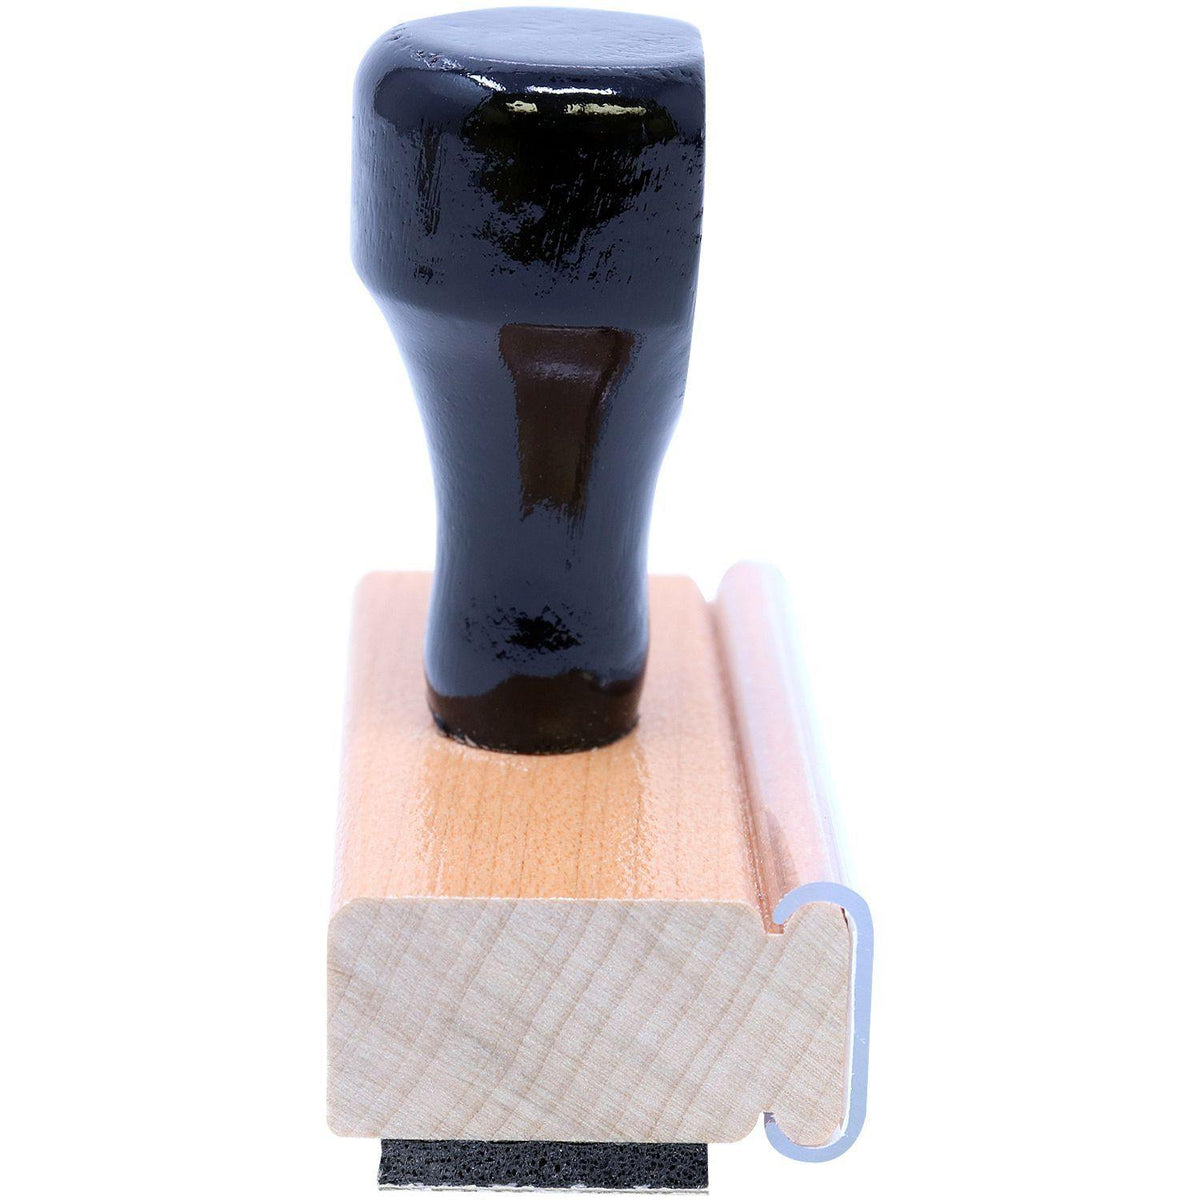 Postmaster Rubber Stamp - Engineer Seal Stamps - Brand_Acorn, Impression Size_Small, Stamp Type_Regular Stamp, Type of Use_General, Type of Use_Office, Type of Use_Postal